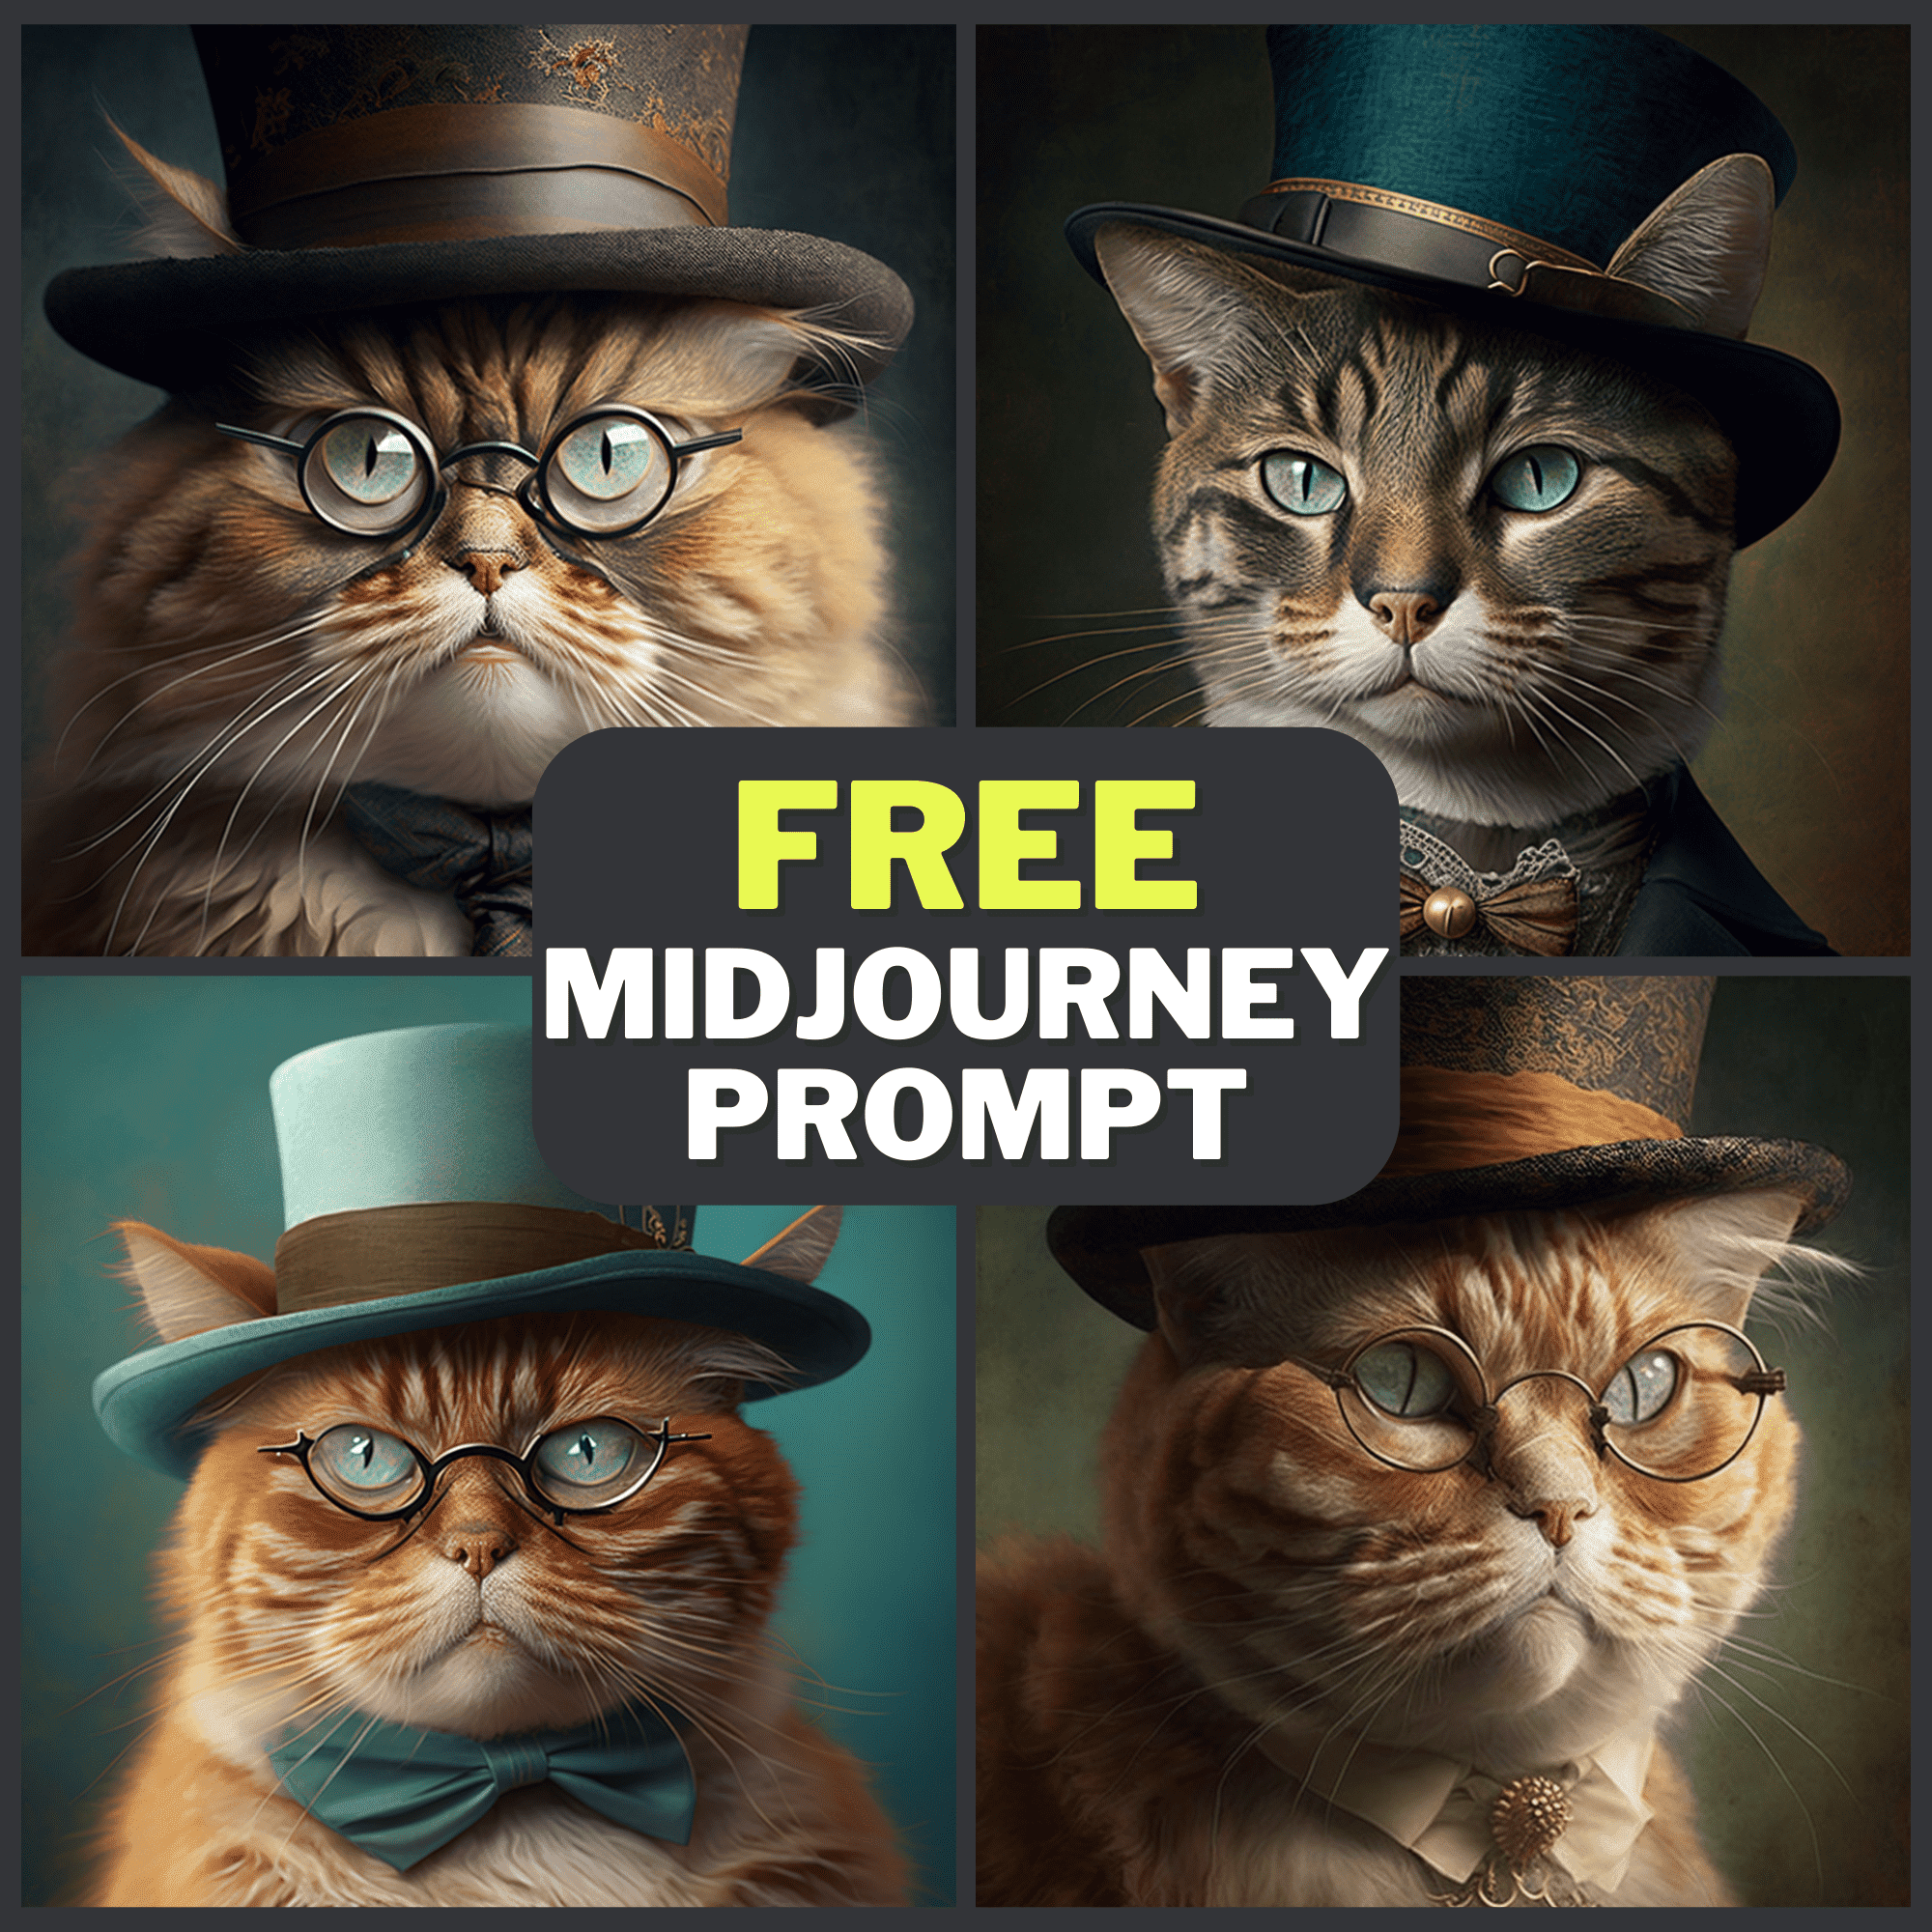 Fashionable Cat Free Midjourney Prompt